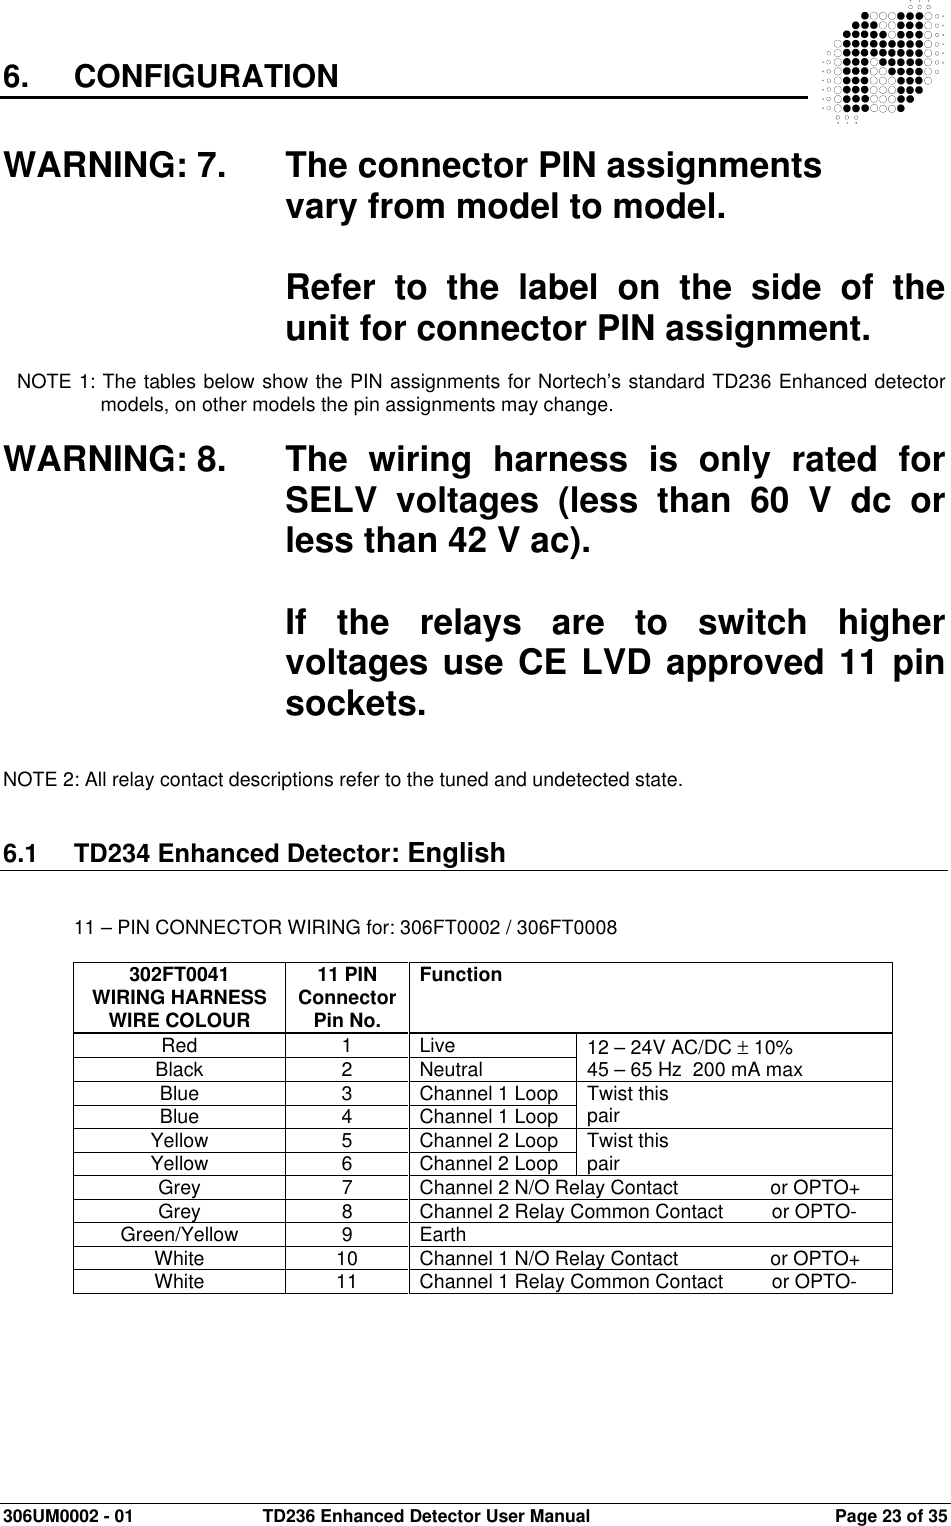  306UM0002 - 01  TD236 Enhanced Detector User Manual   Page 23 of 35  6.  CONFIGURATION   WARNING: 7.  The connector PIN assignments  vary from model to model.  Refer  to  the  label  on  the  side  of  the unit for connector PIN assignment.  NOTE 1: The tables below show the PIN assignments for Nortech’s standard TD236 Enhanced detector models, on other models the pin assignments may change.  WARNING: 8.  The  wiring  harness  is  only  rated  for SELV  voltages  (less  than  60  V  dc  or less than 42 V ac).    If  the  relays  are  to  switch  higher voltages use CE LVD approved 11 pin sockets.   NOTE 2: All relay contact descriptions refer to the tuned and undetected state.   6.1  TD234 Enhanced Detector: English   11 – PIN CONNECTOR WIRING for: 306FT0002 / 306FT0008  302FT0041 WIRING HARNESS WIRE COLOUR 11 PIN ConnectorPin No. Function Red  1  Live Black  2  Neutral  12 – 24V AC/DC ± 10% 45 – 65 Hz  200 mA max Blue  3  Channel 1 Loop Blue  4  Channel 1 Loop  Twist this pair Yellow  5  Channel 2 Loop Yellow  6  Channel 2 Loop  Twist this pair Grey  7  Channel 2 N/O Relay Contact                 or OPTO+ Grey  8  Channel 2 Relay Common Contact         or OPTO- Green/Yellow  9  Earth White  10  Channel 1 N/O Relay Contact                 or OPTO+ White  11  Channel 1 Relay Common Contact         or OPTO-      